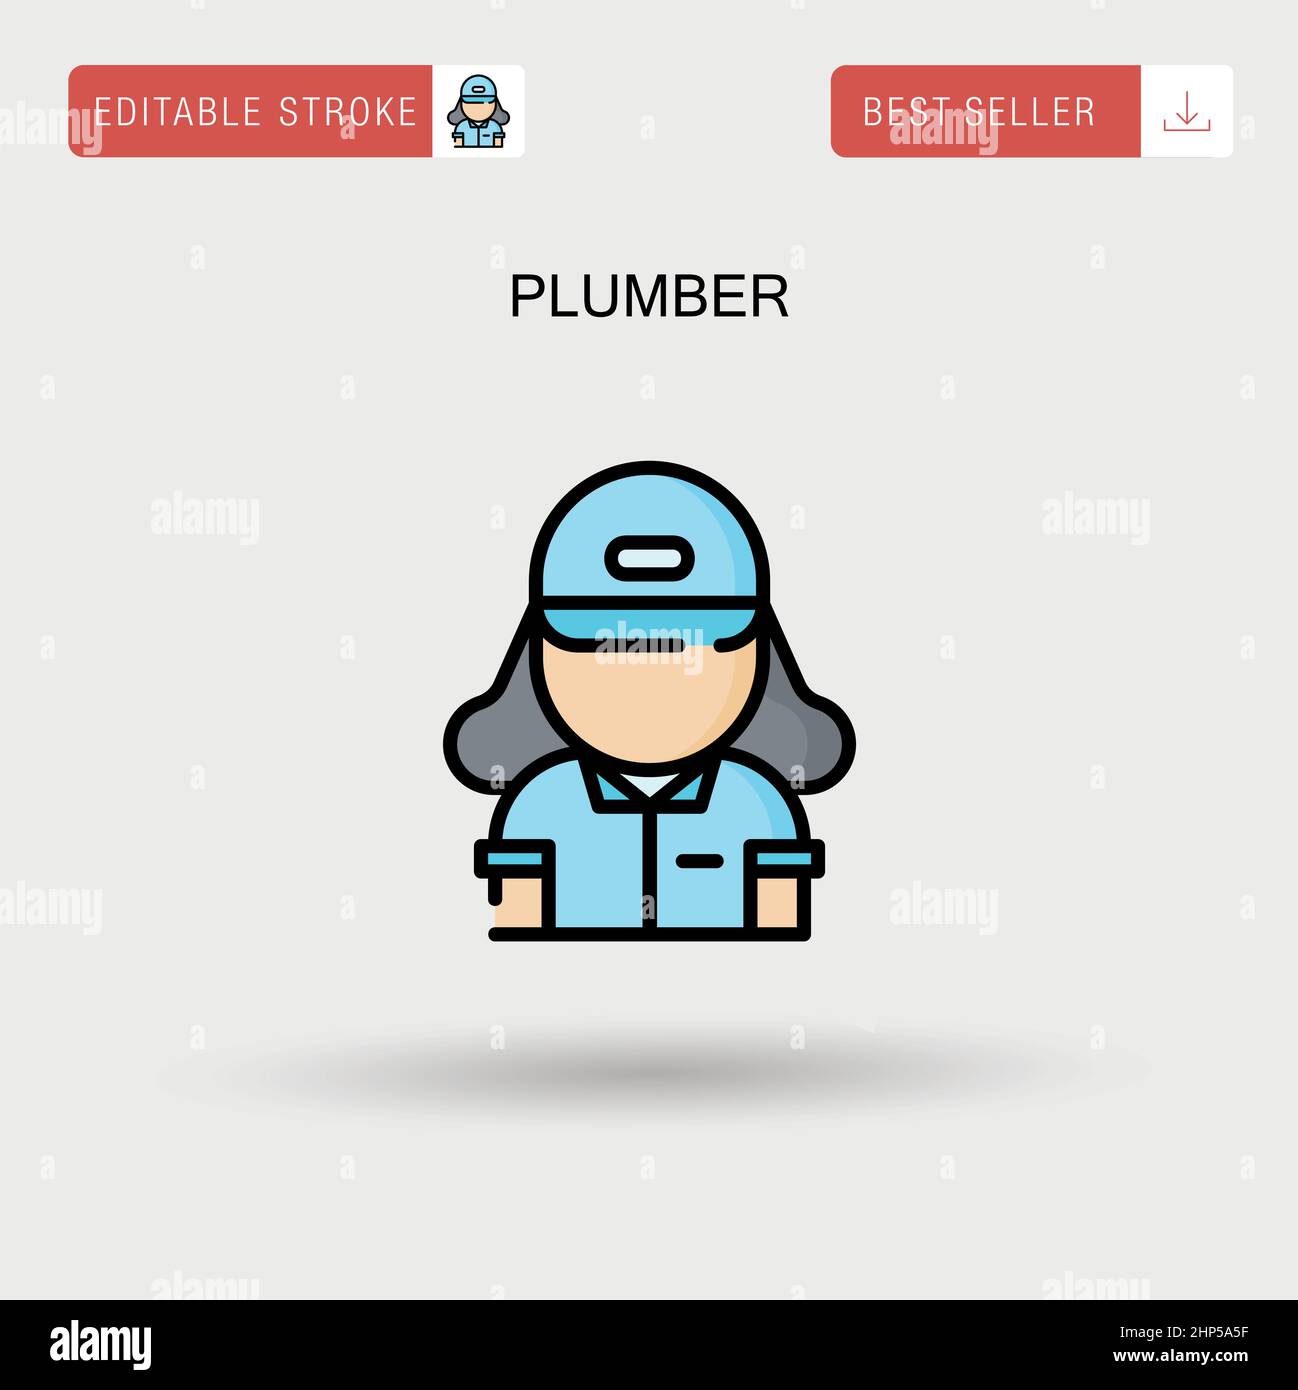 Plumber Simple vector icon. Stock Vector